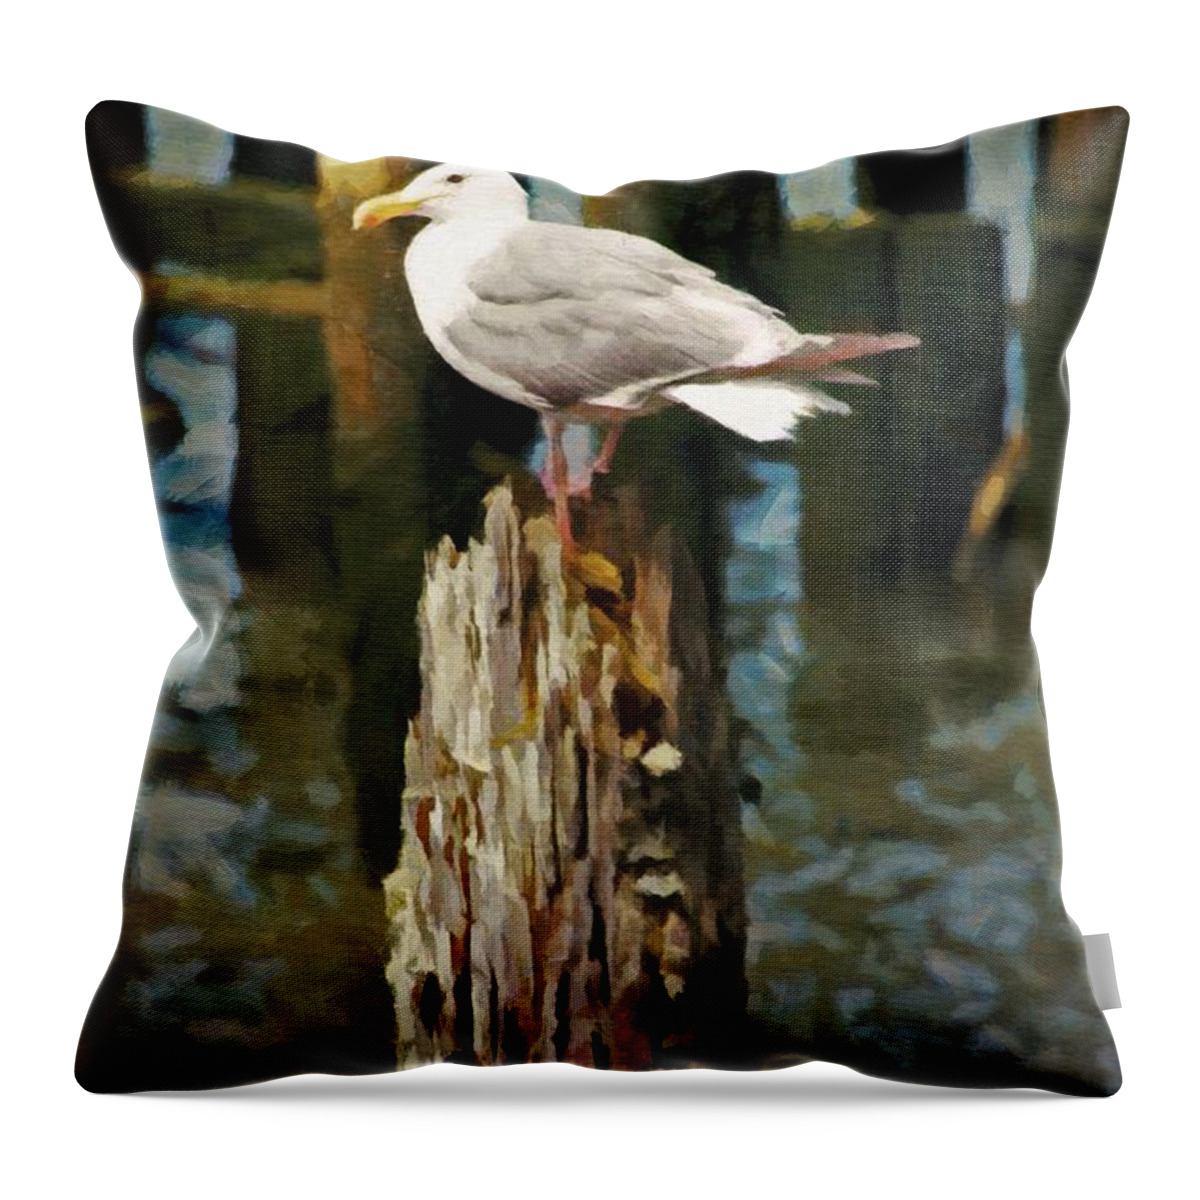 Seagull Throw Pillow featuring the painting Astoria Waterfront, Scene 2 - Post Posing by Jeffrey Kolker